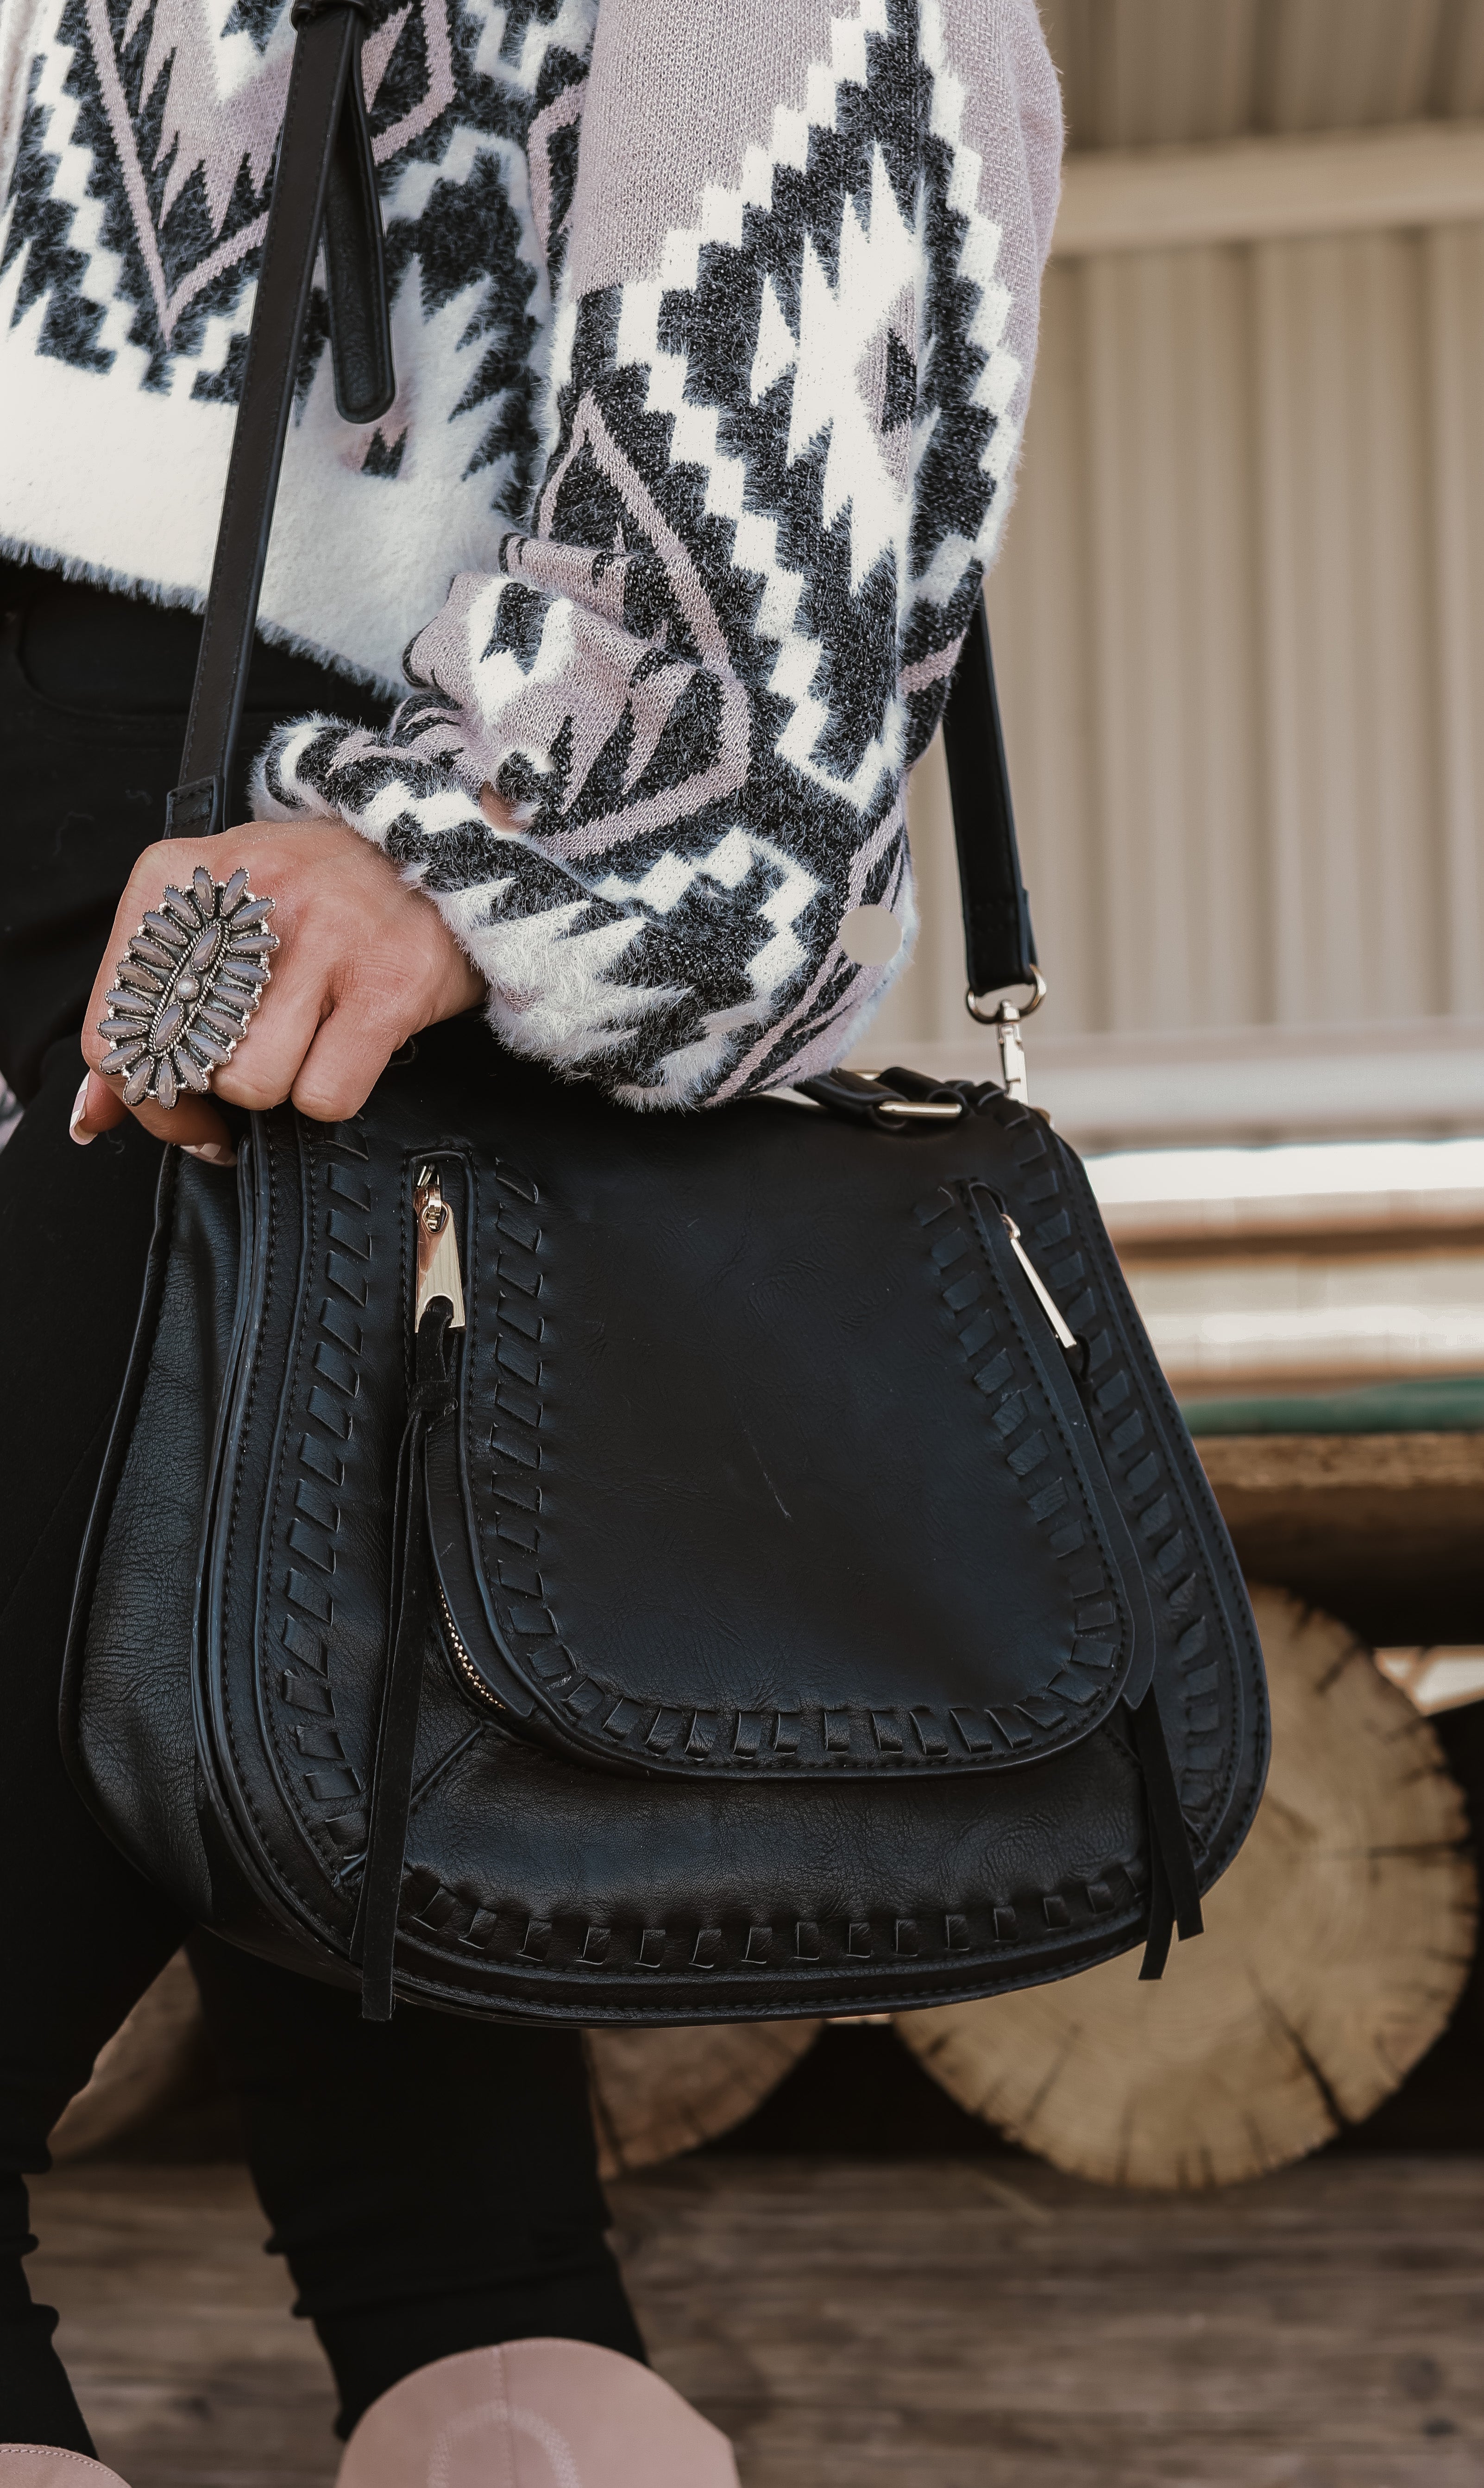 5 Under-the-Radar Bag Brands French Women Always Come Back to | Bags, Purses,  Women handbags